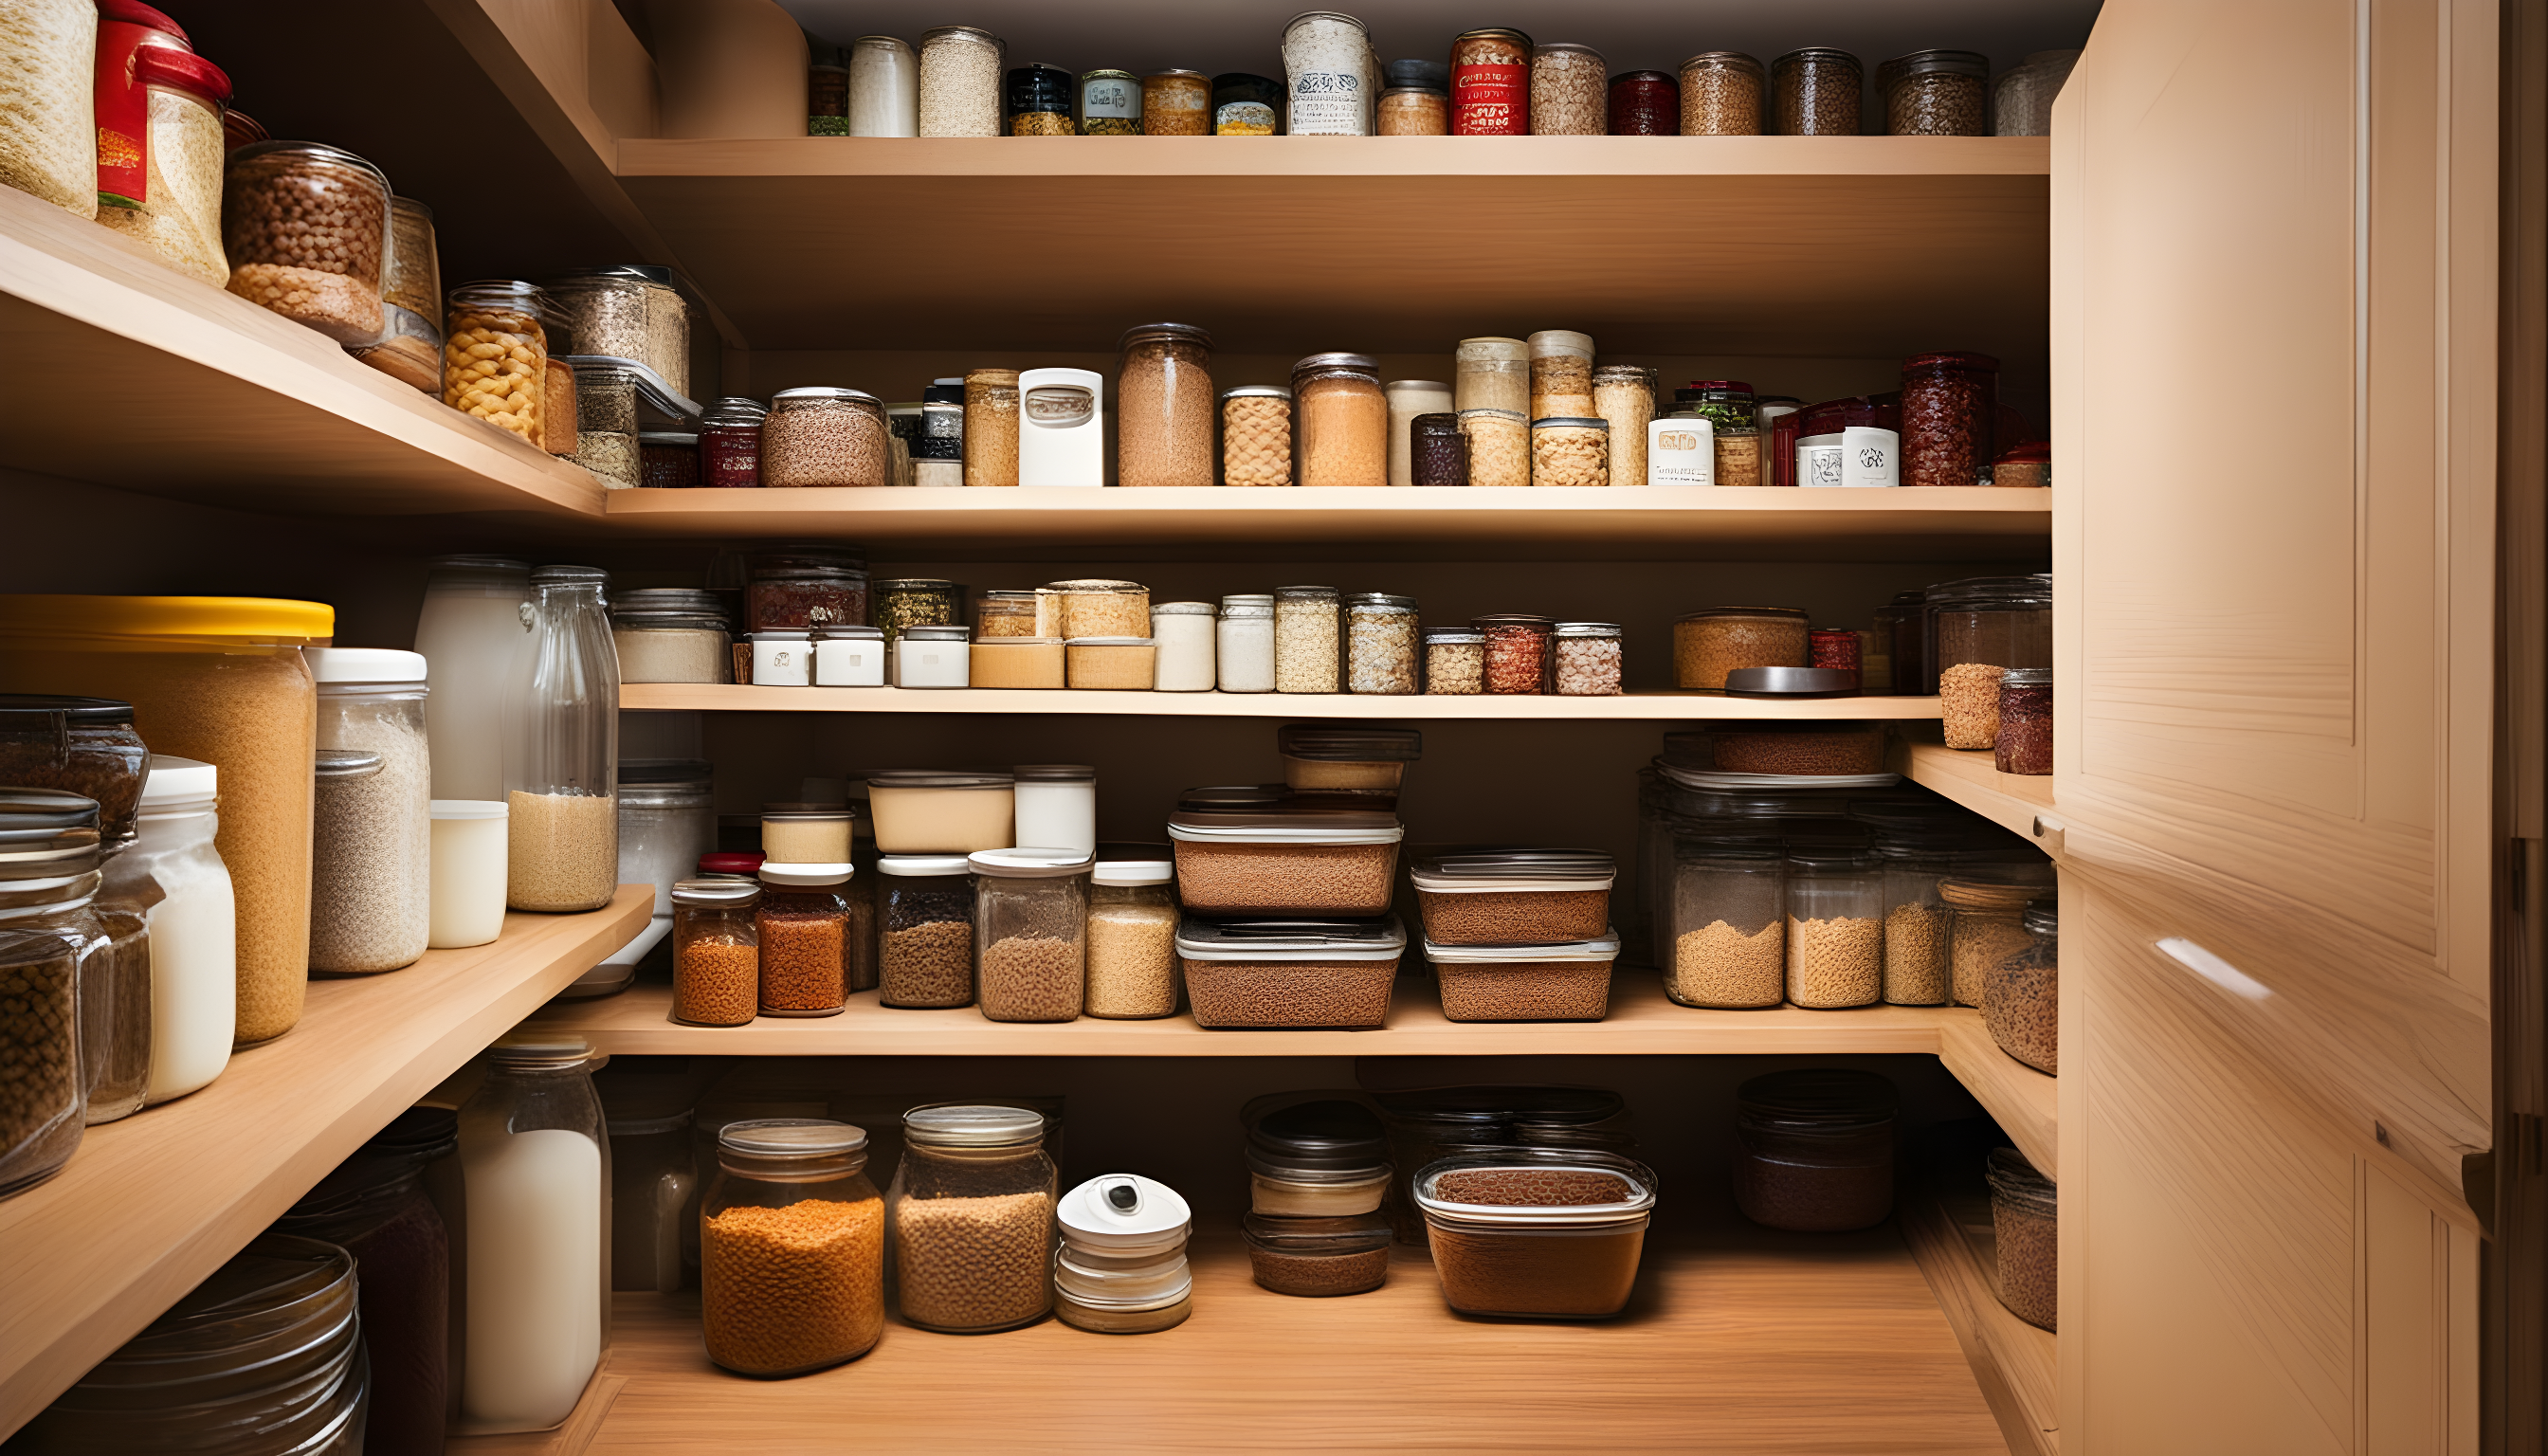 What Should Be In A Walk-In Pantry?